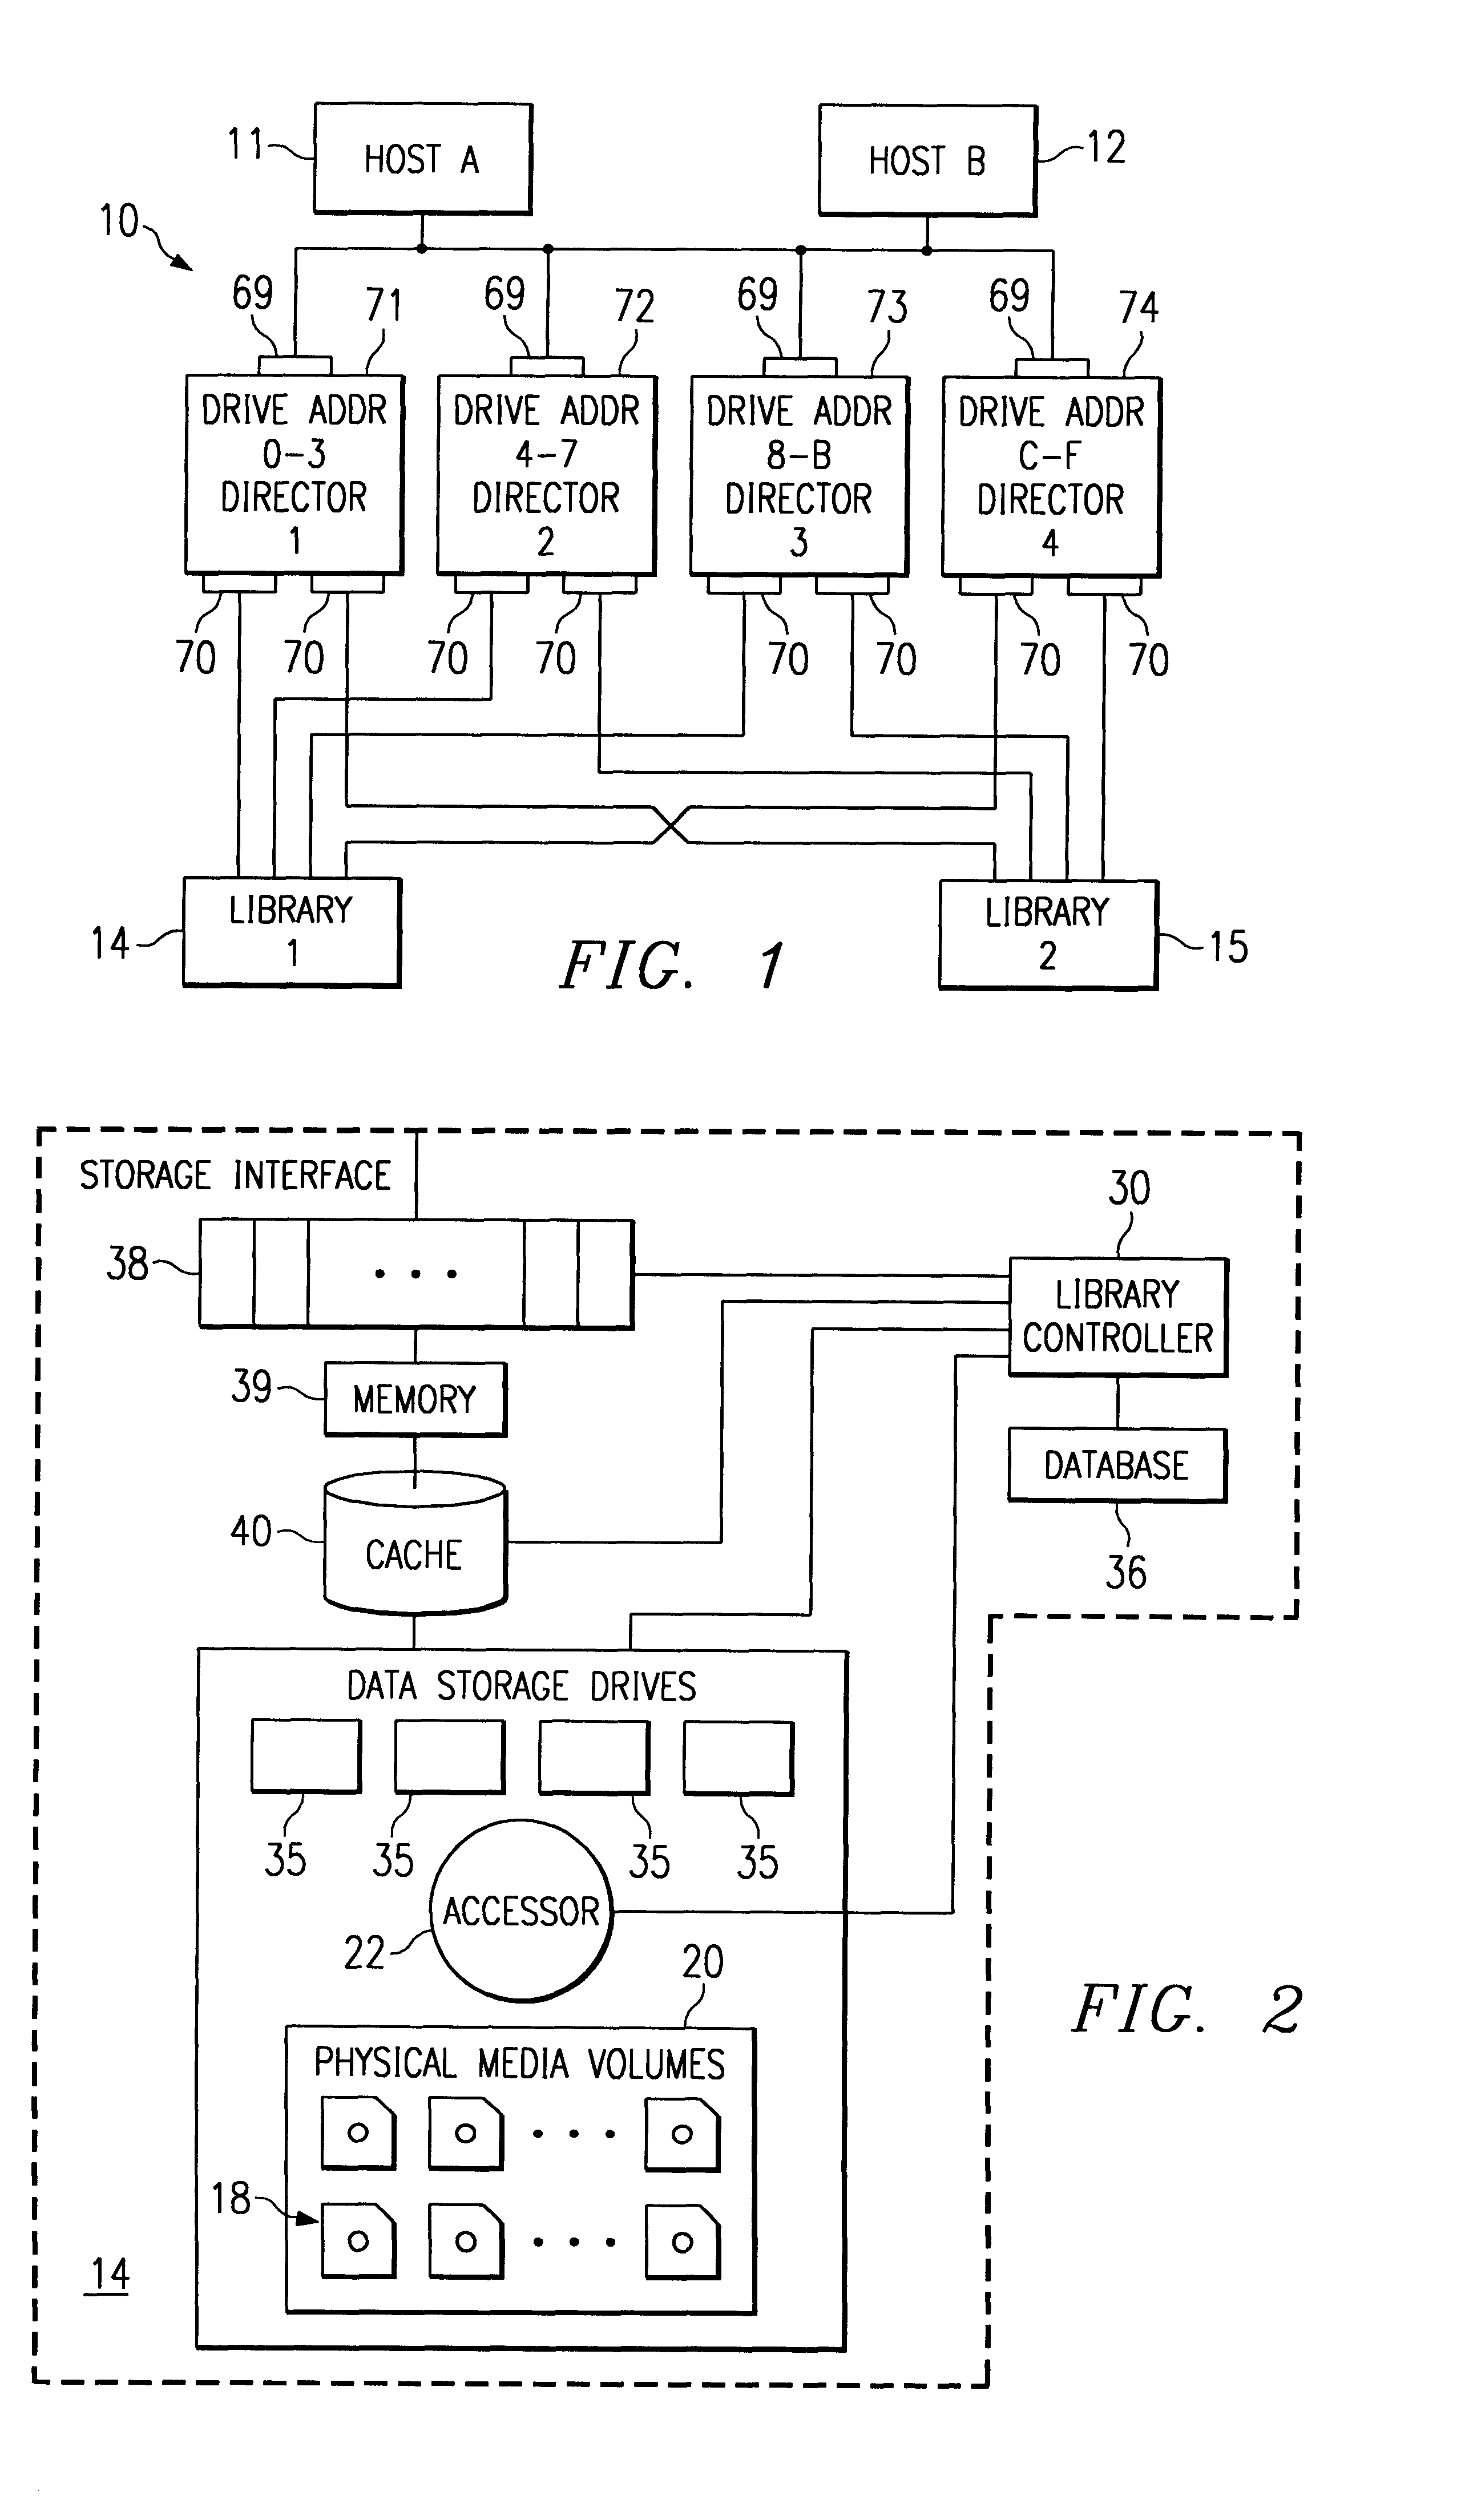 Recalling logical volumes to cache from physical media volumes for redundant storage in automated data storage libraries